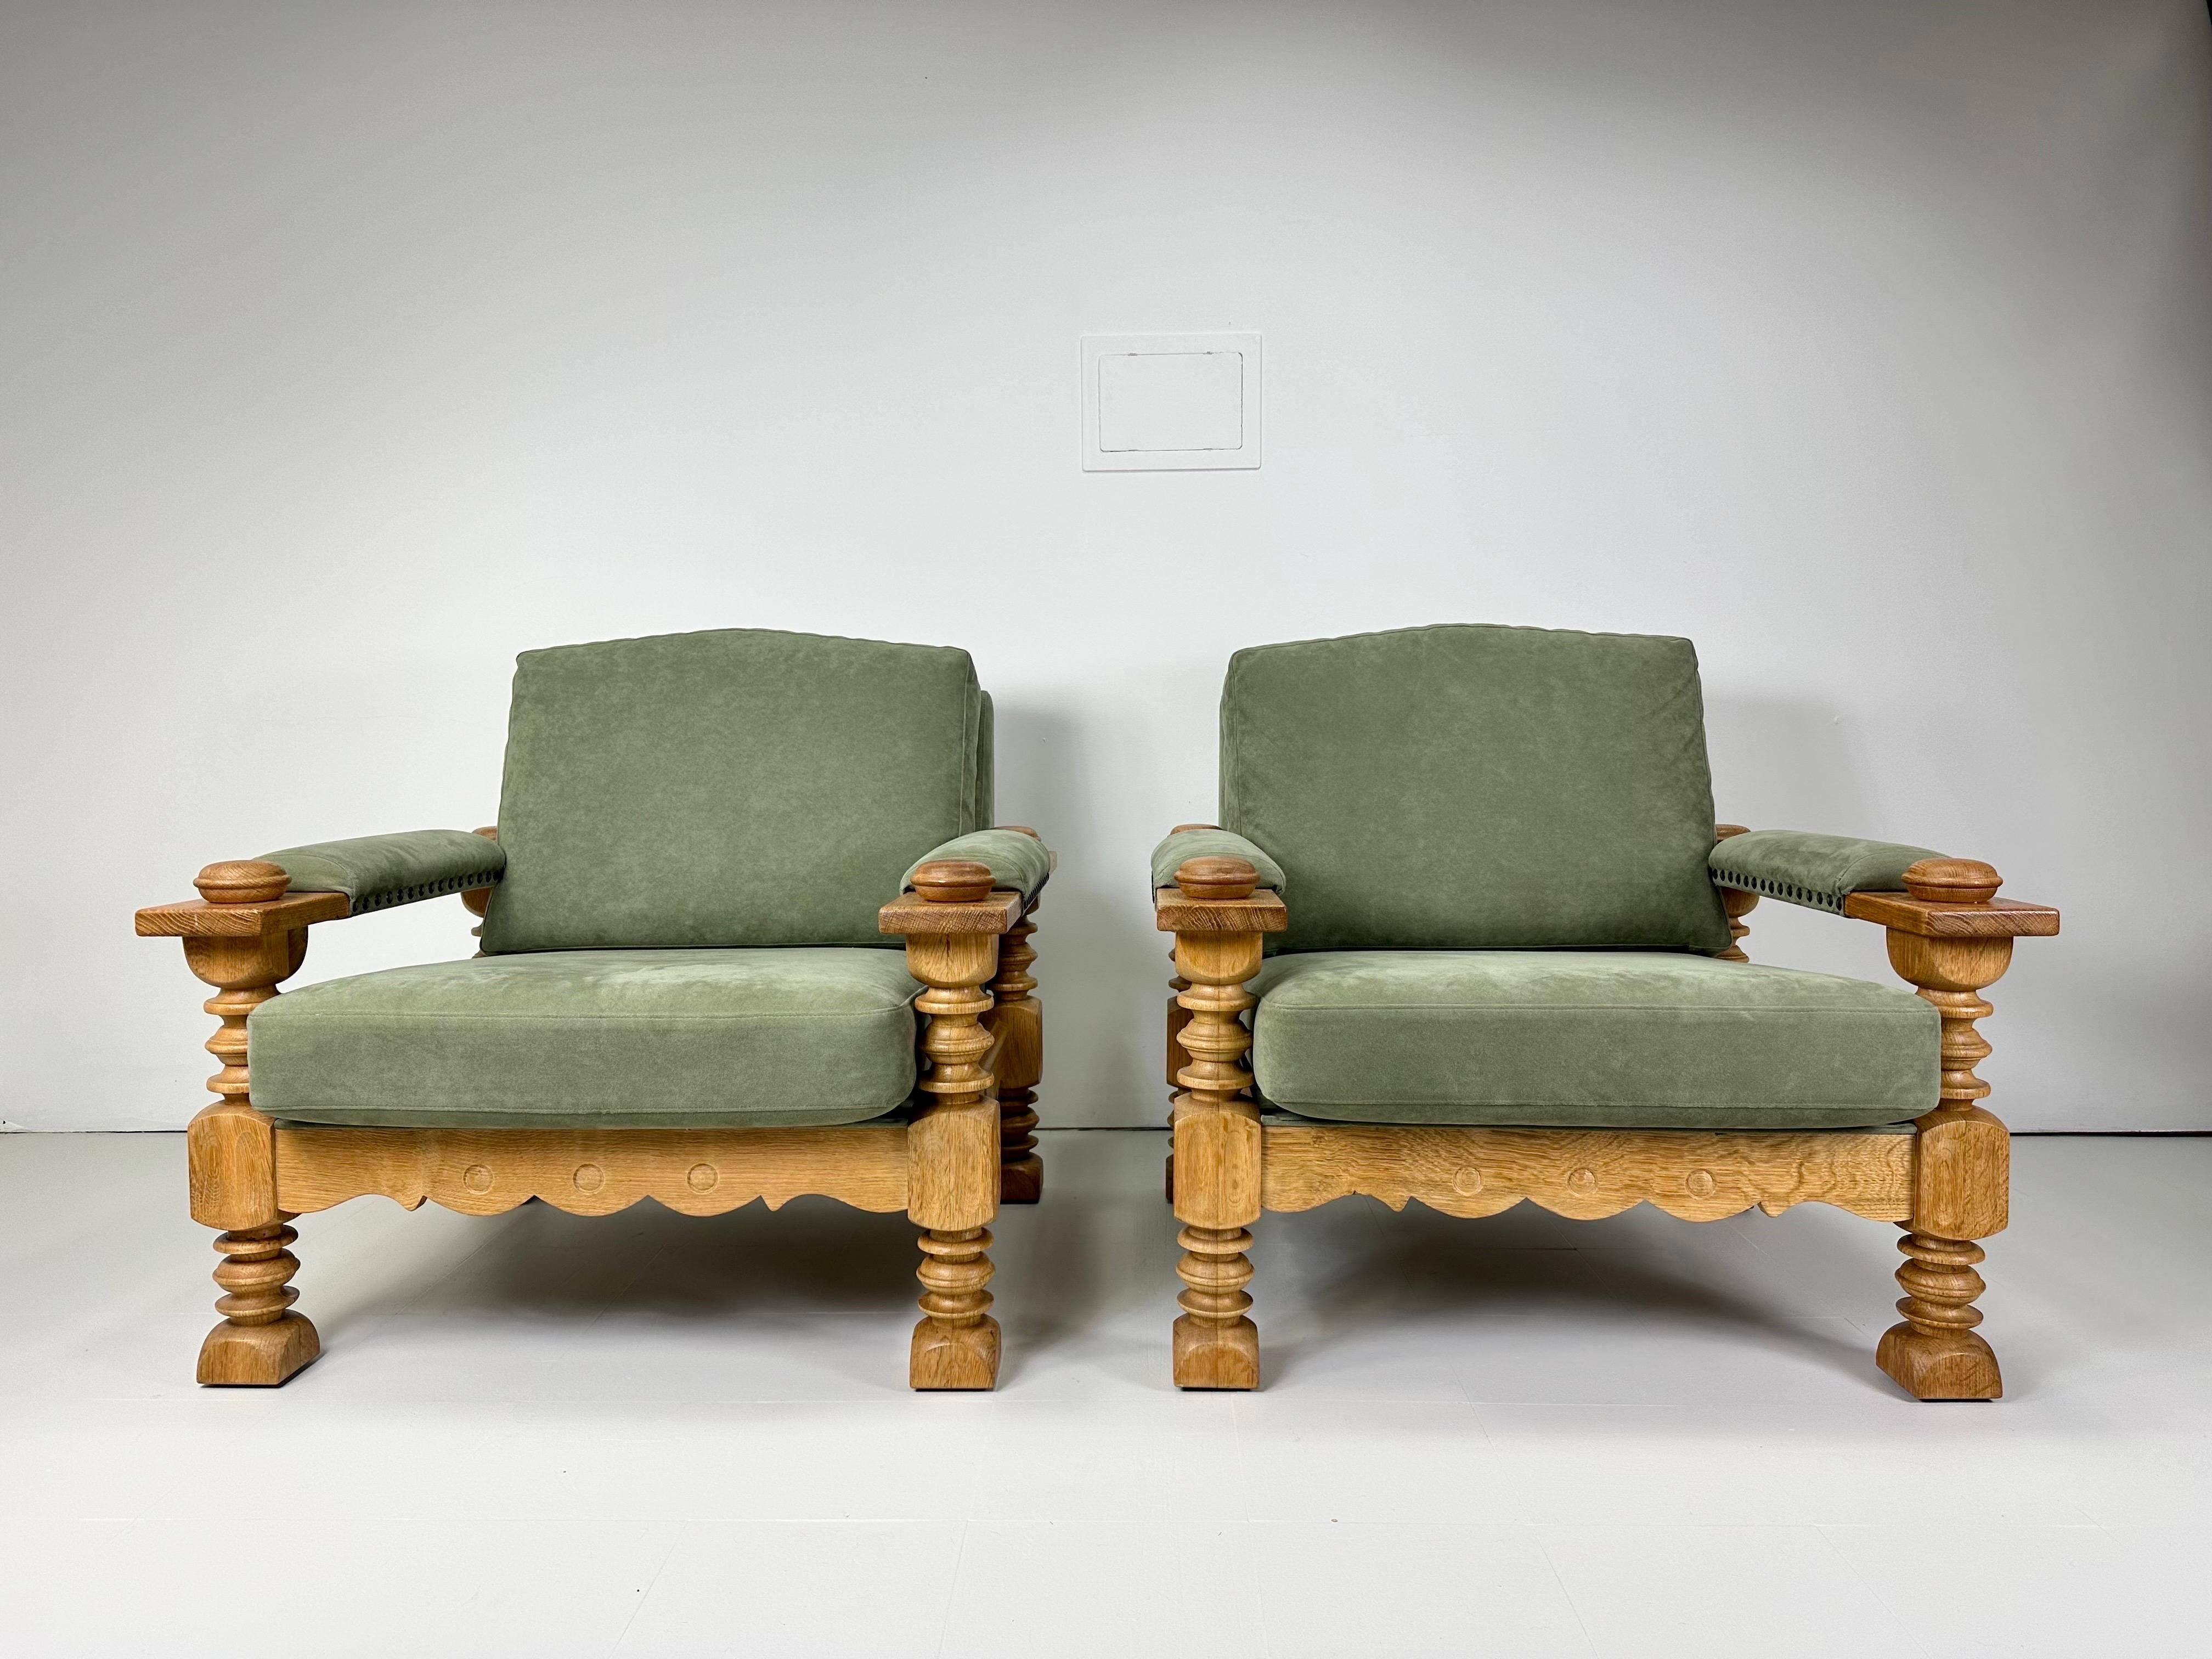 Danish Designed Lounge Chairs. Carved oak frames. Nail head details. Micro Sued Upholstery. 1970’s, Denmark

Delivery to NYC for $450.